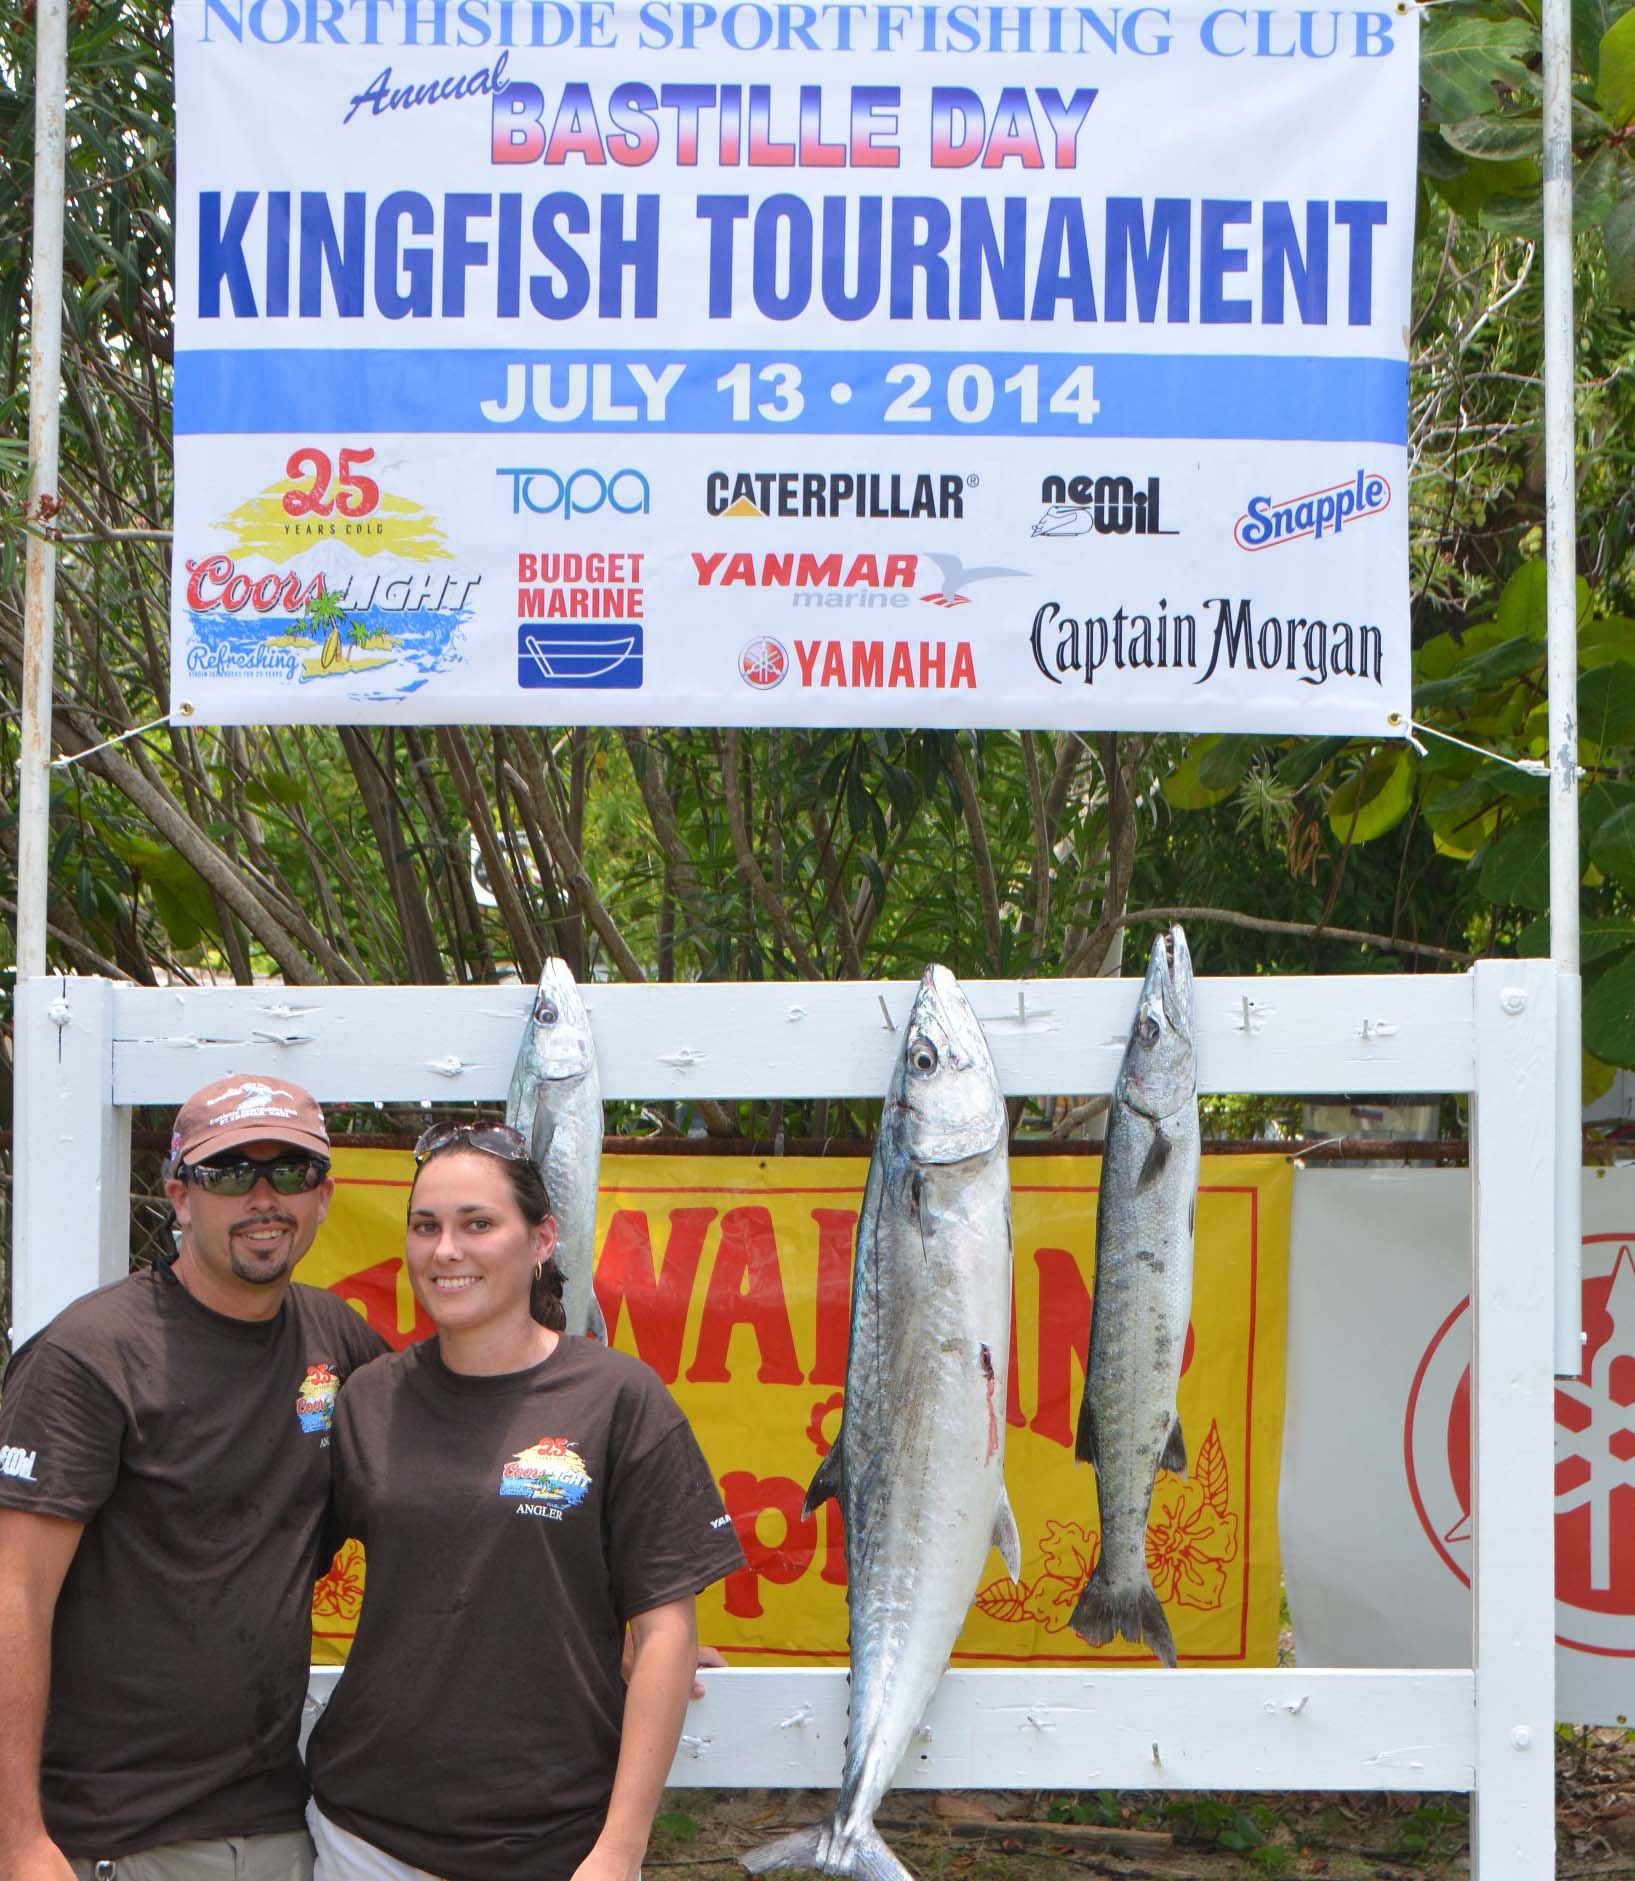 Calling all anglers! Annual Bastille Day Kingfish Tournament 1